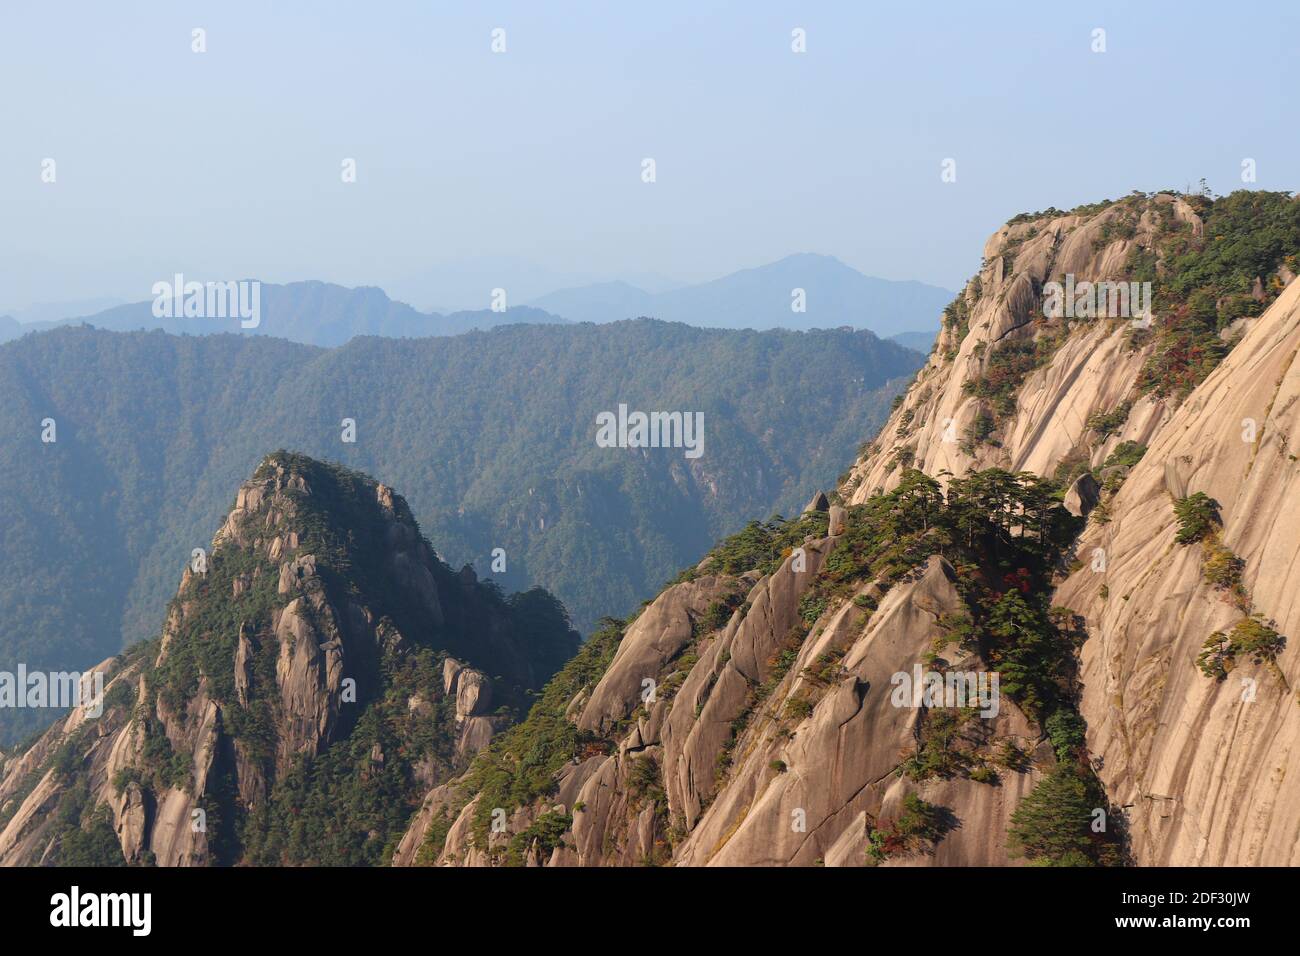 Scenic sunset view of Huangshan / yellow mountain cliffs in China Stock Photo